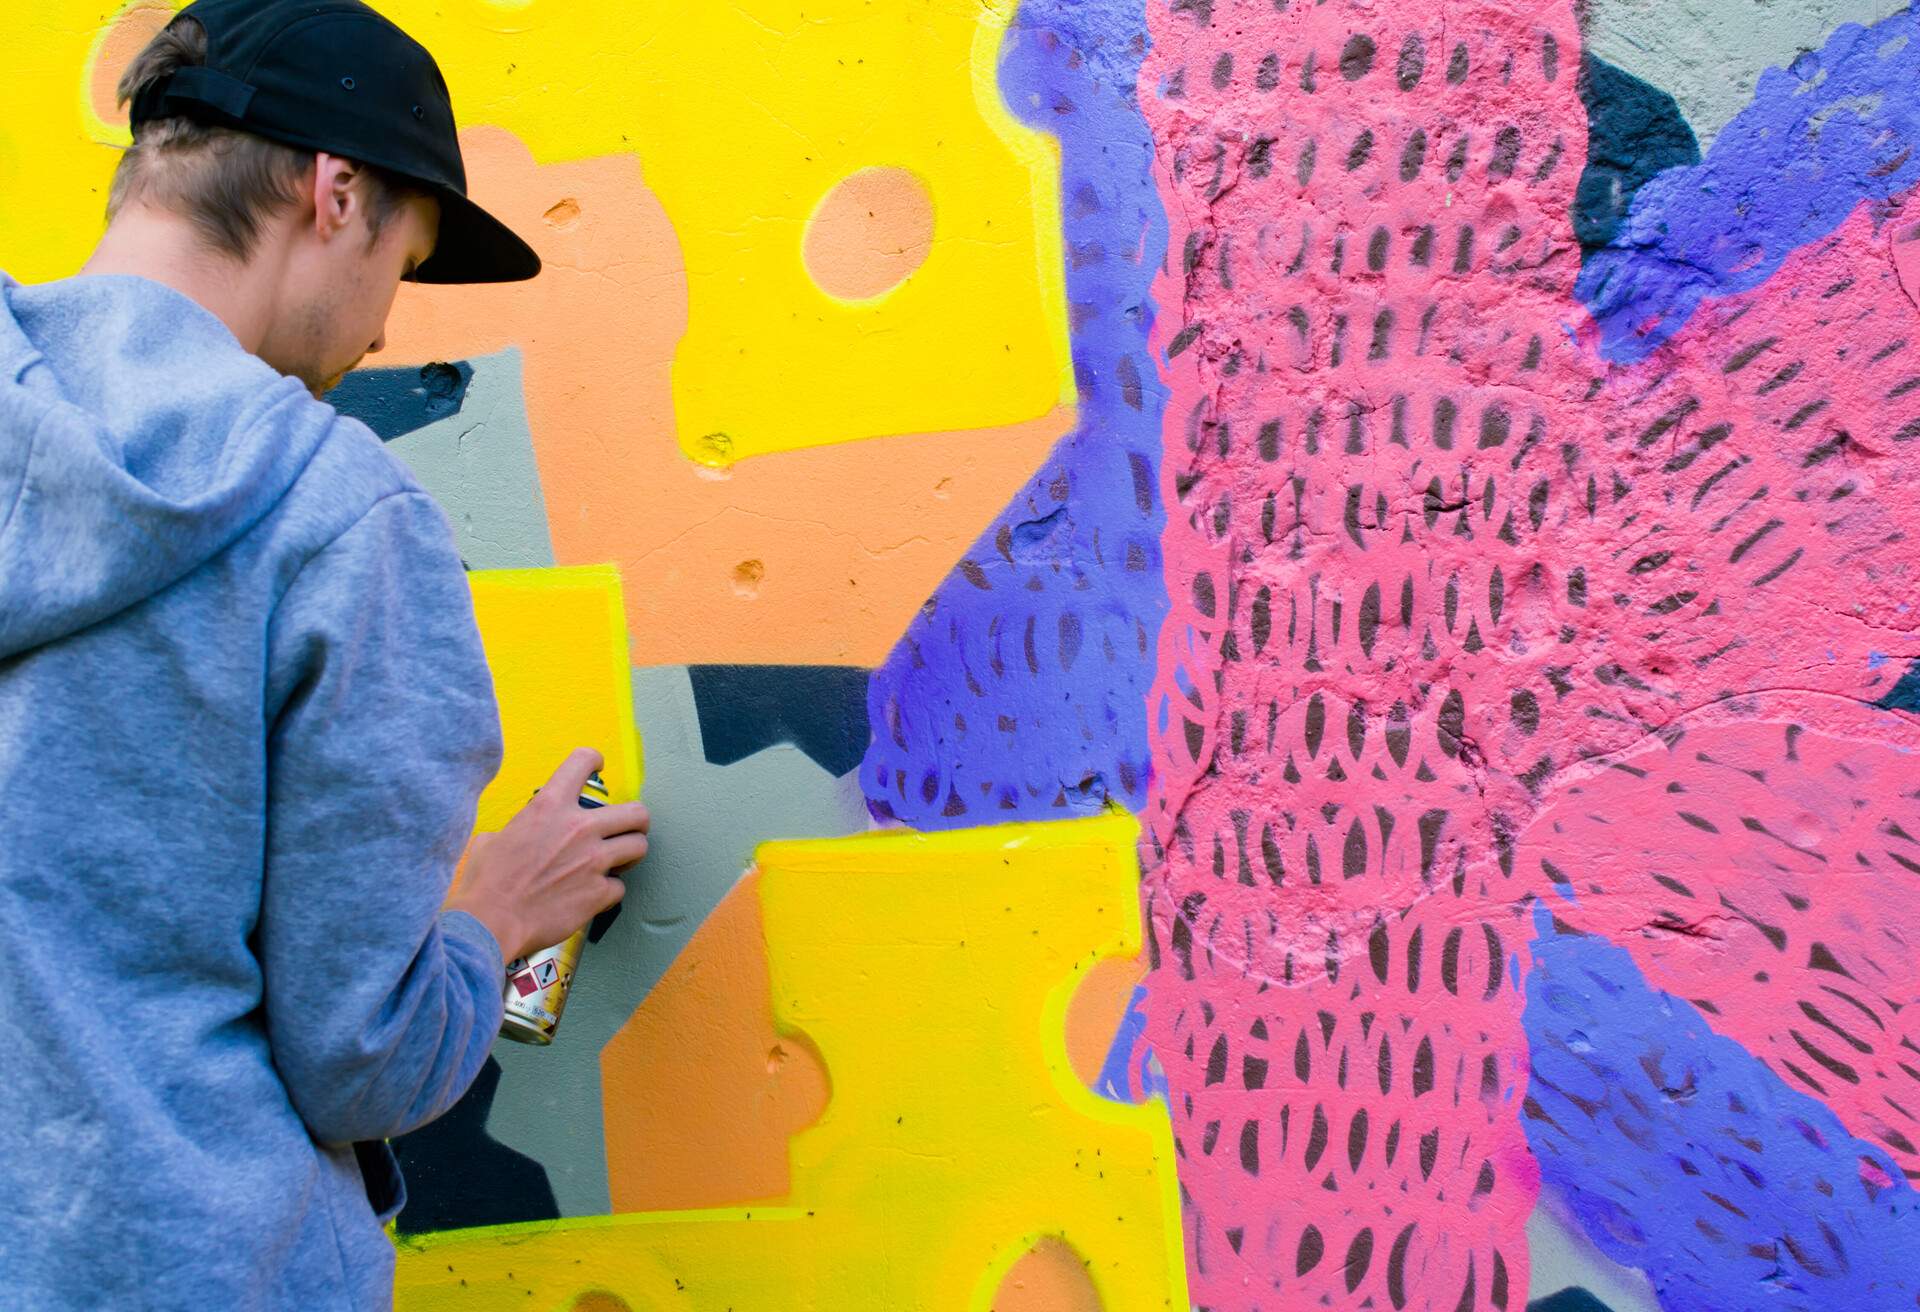 A man spraying paint on a brightly coloured wall graffiti.